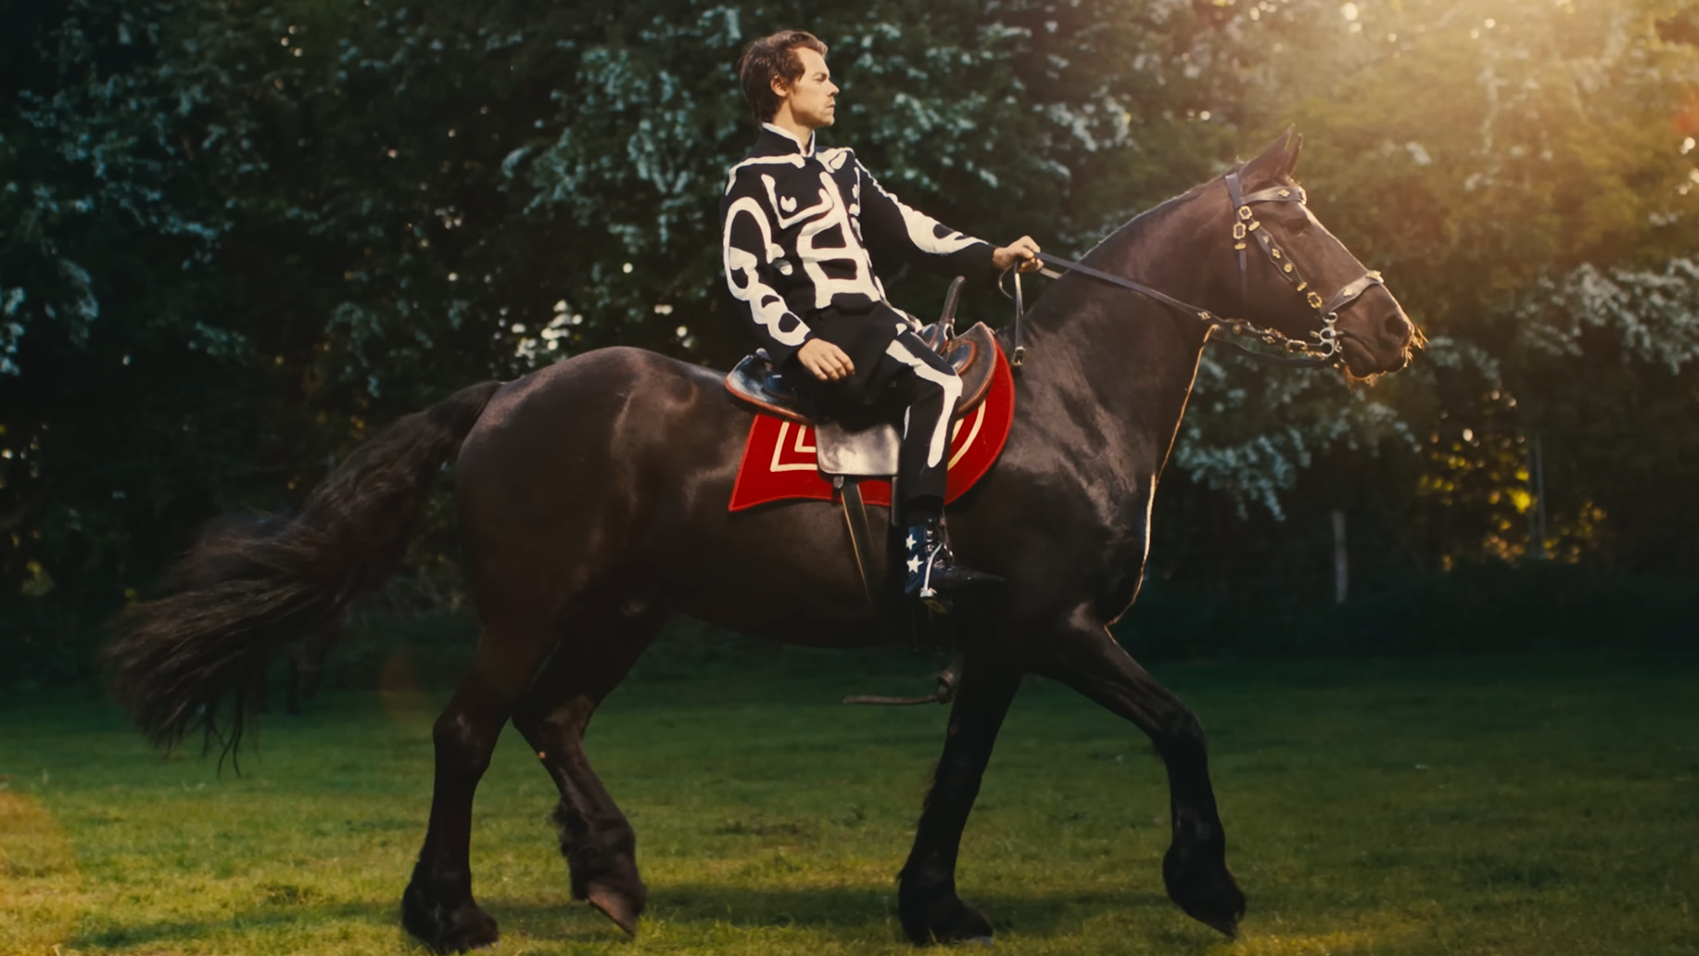 Harry Styles How pop star was taught to ride a horse for video image